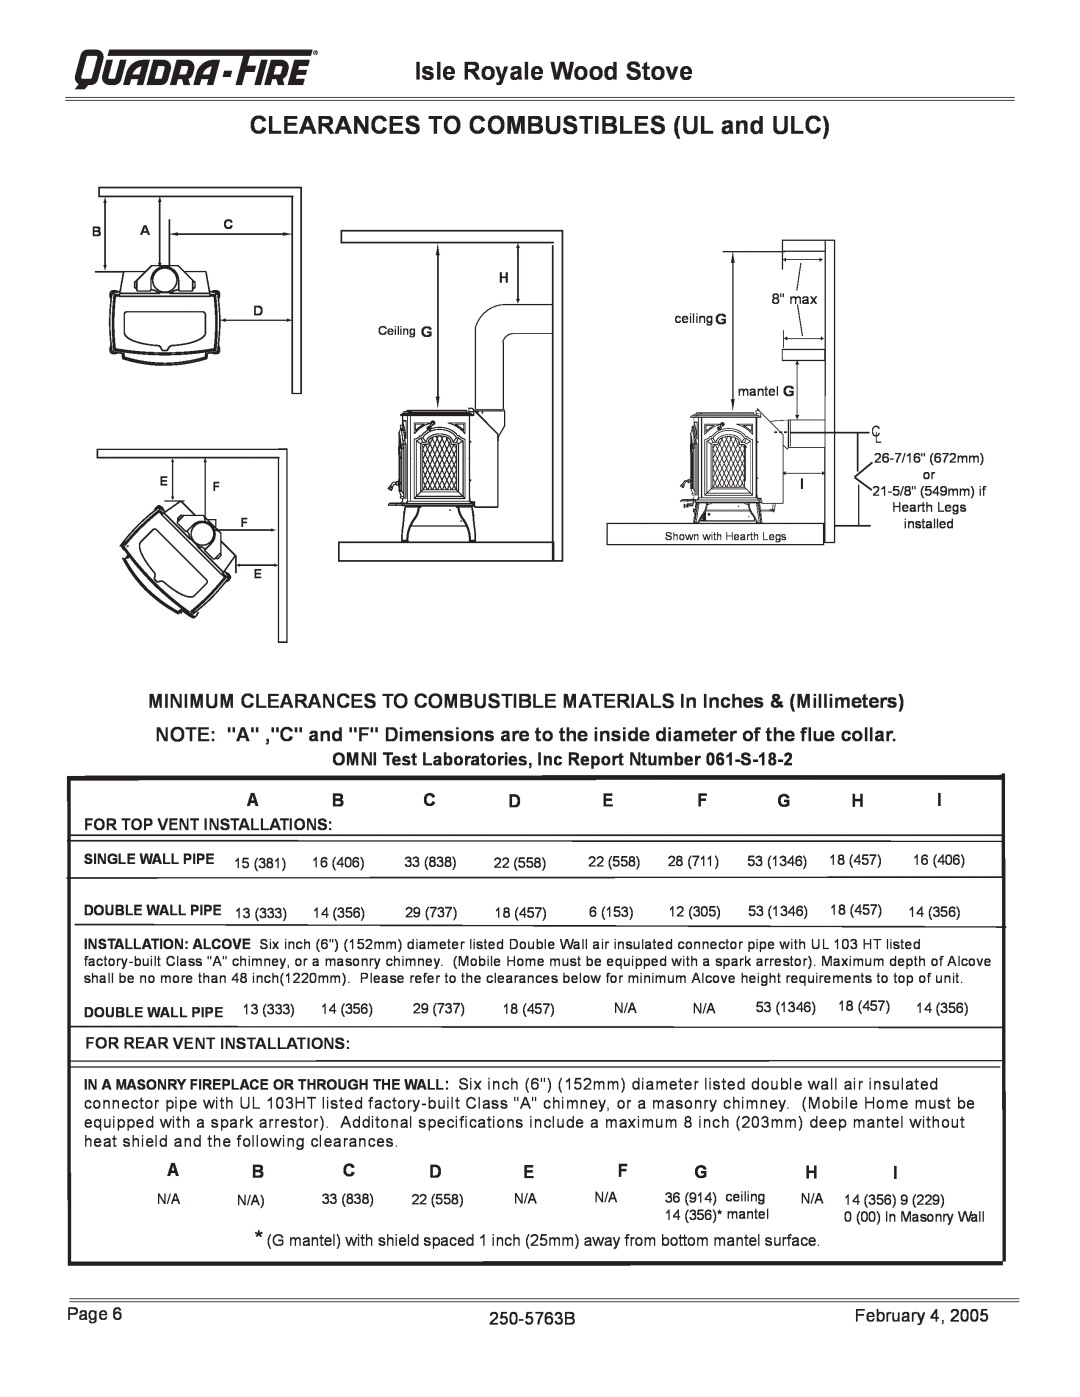 Quadra-Fire installation instructions CLEARANCES TO COMBUSTIBLES UL and ULC, Isle Royale Wood Stove 